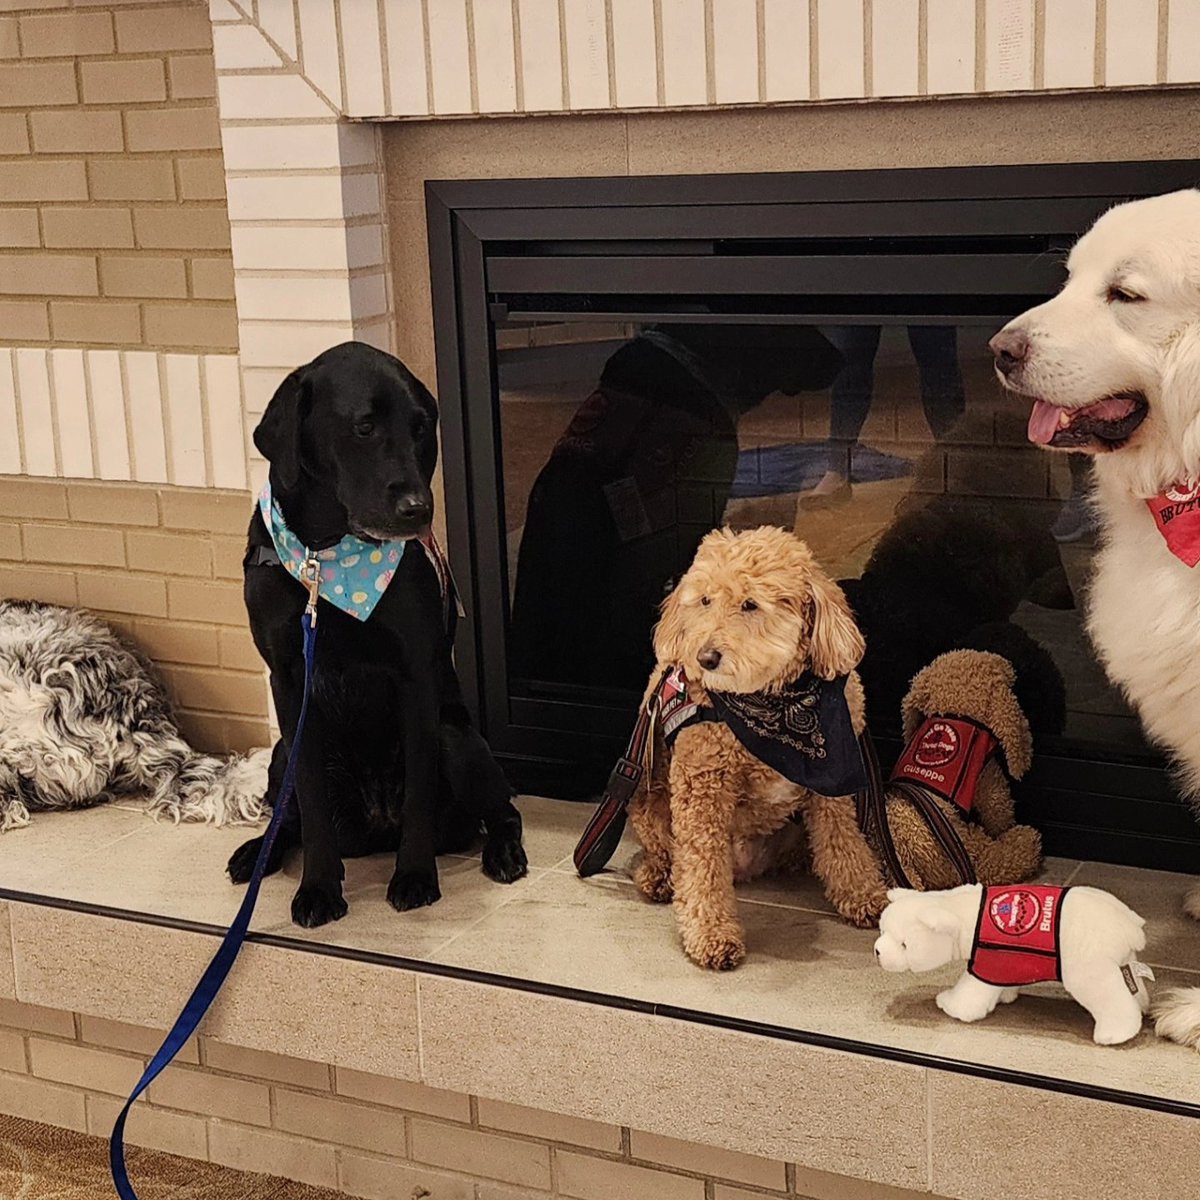 Giuseppe, Stella, Brutus, and SuzyQ brought sunshine and snuggles to the Walkersville Library staff this morning! #giuseppe #goteamtherapydogs